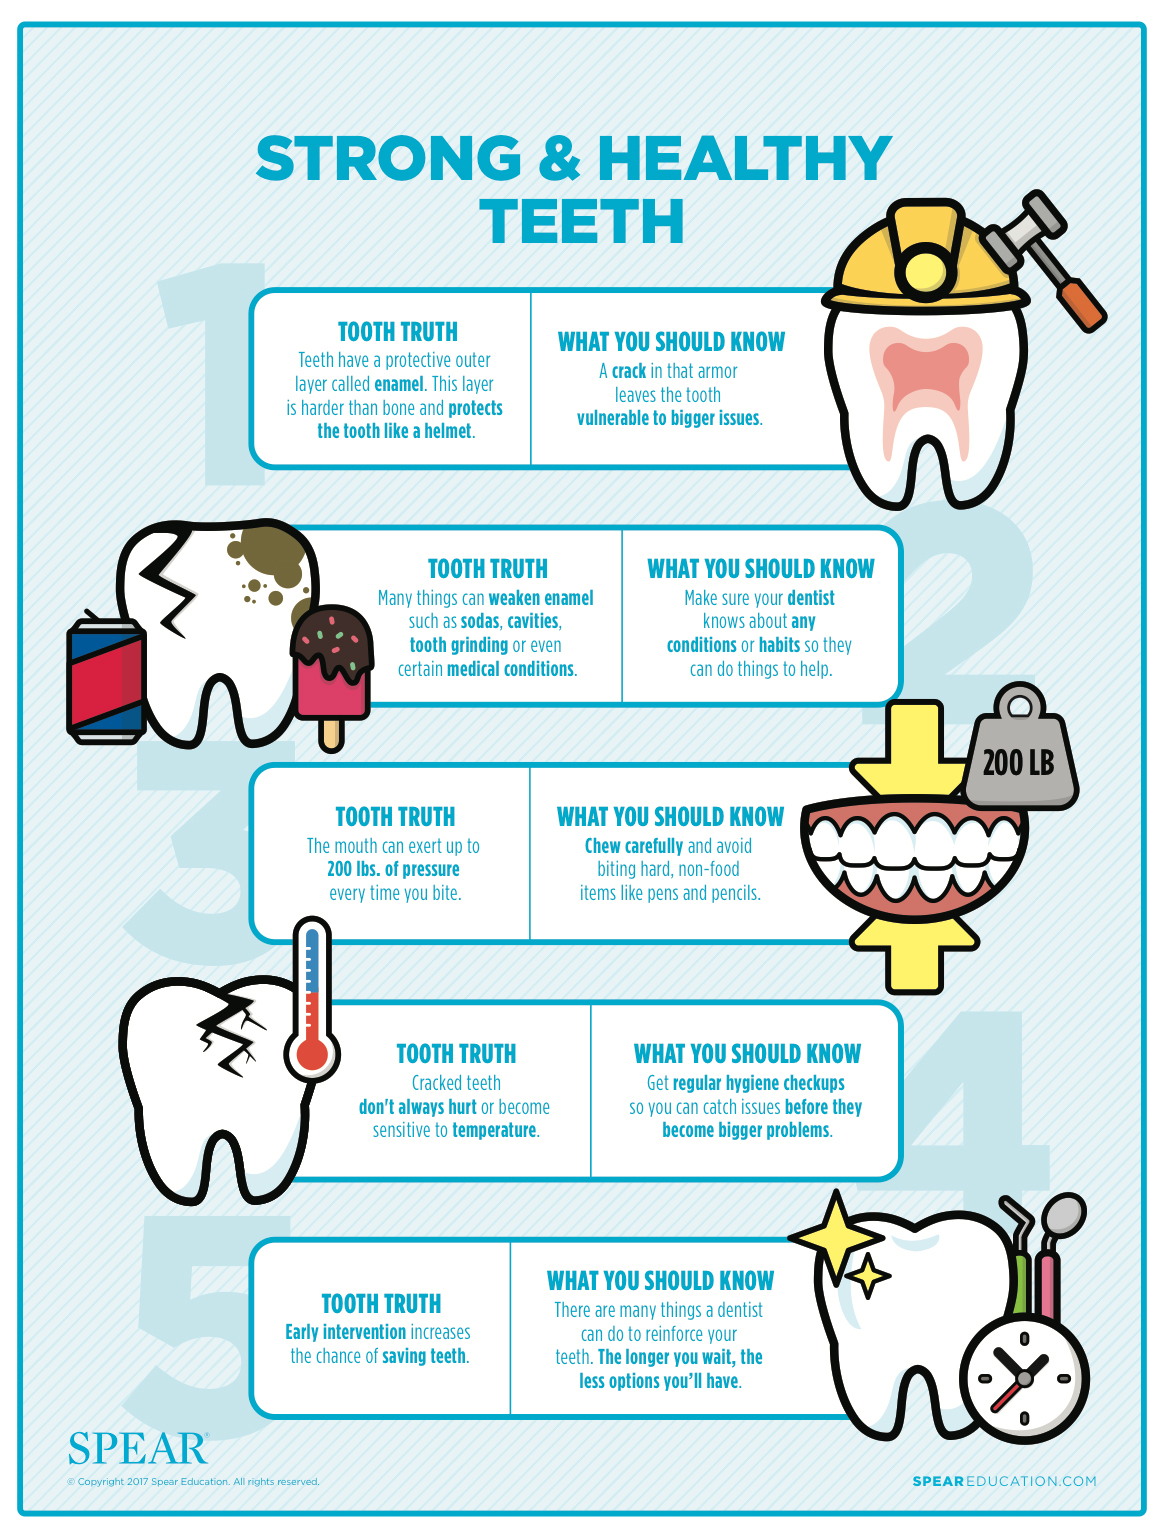 Strong and Healthy Teeth